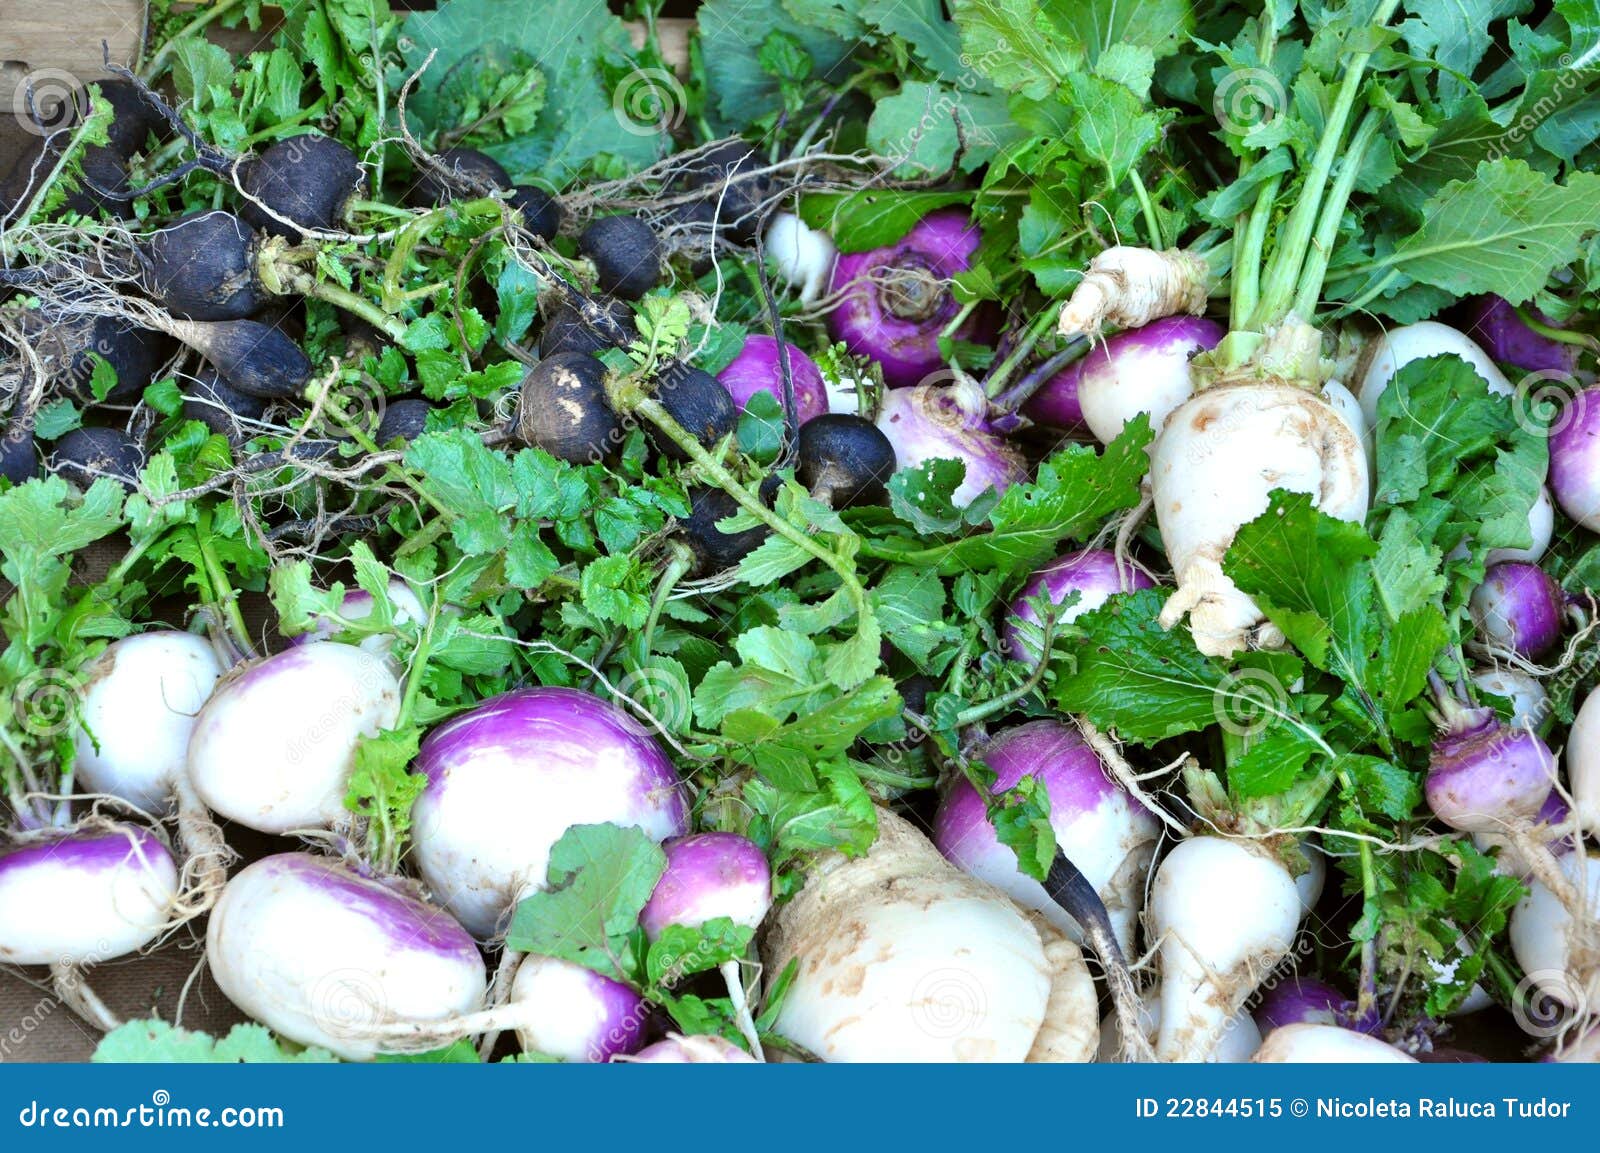 organic vegetables in a market : turnips